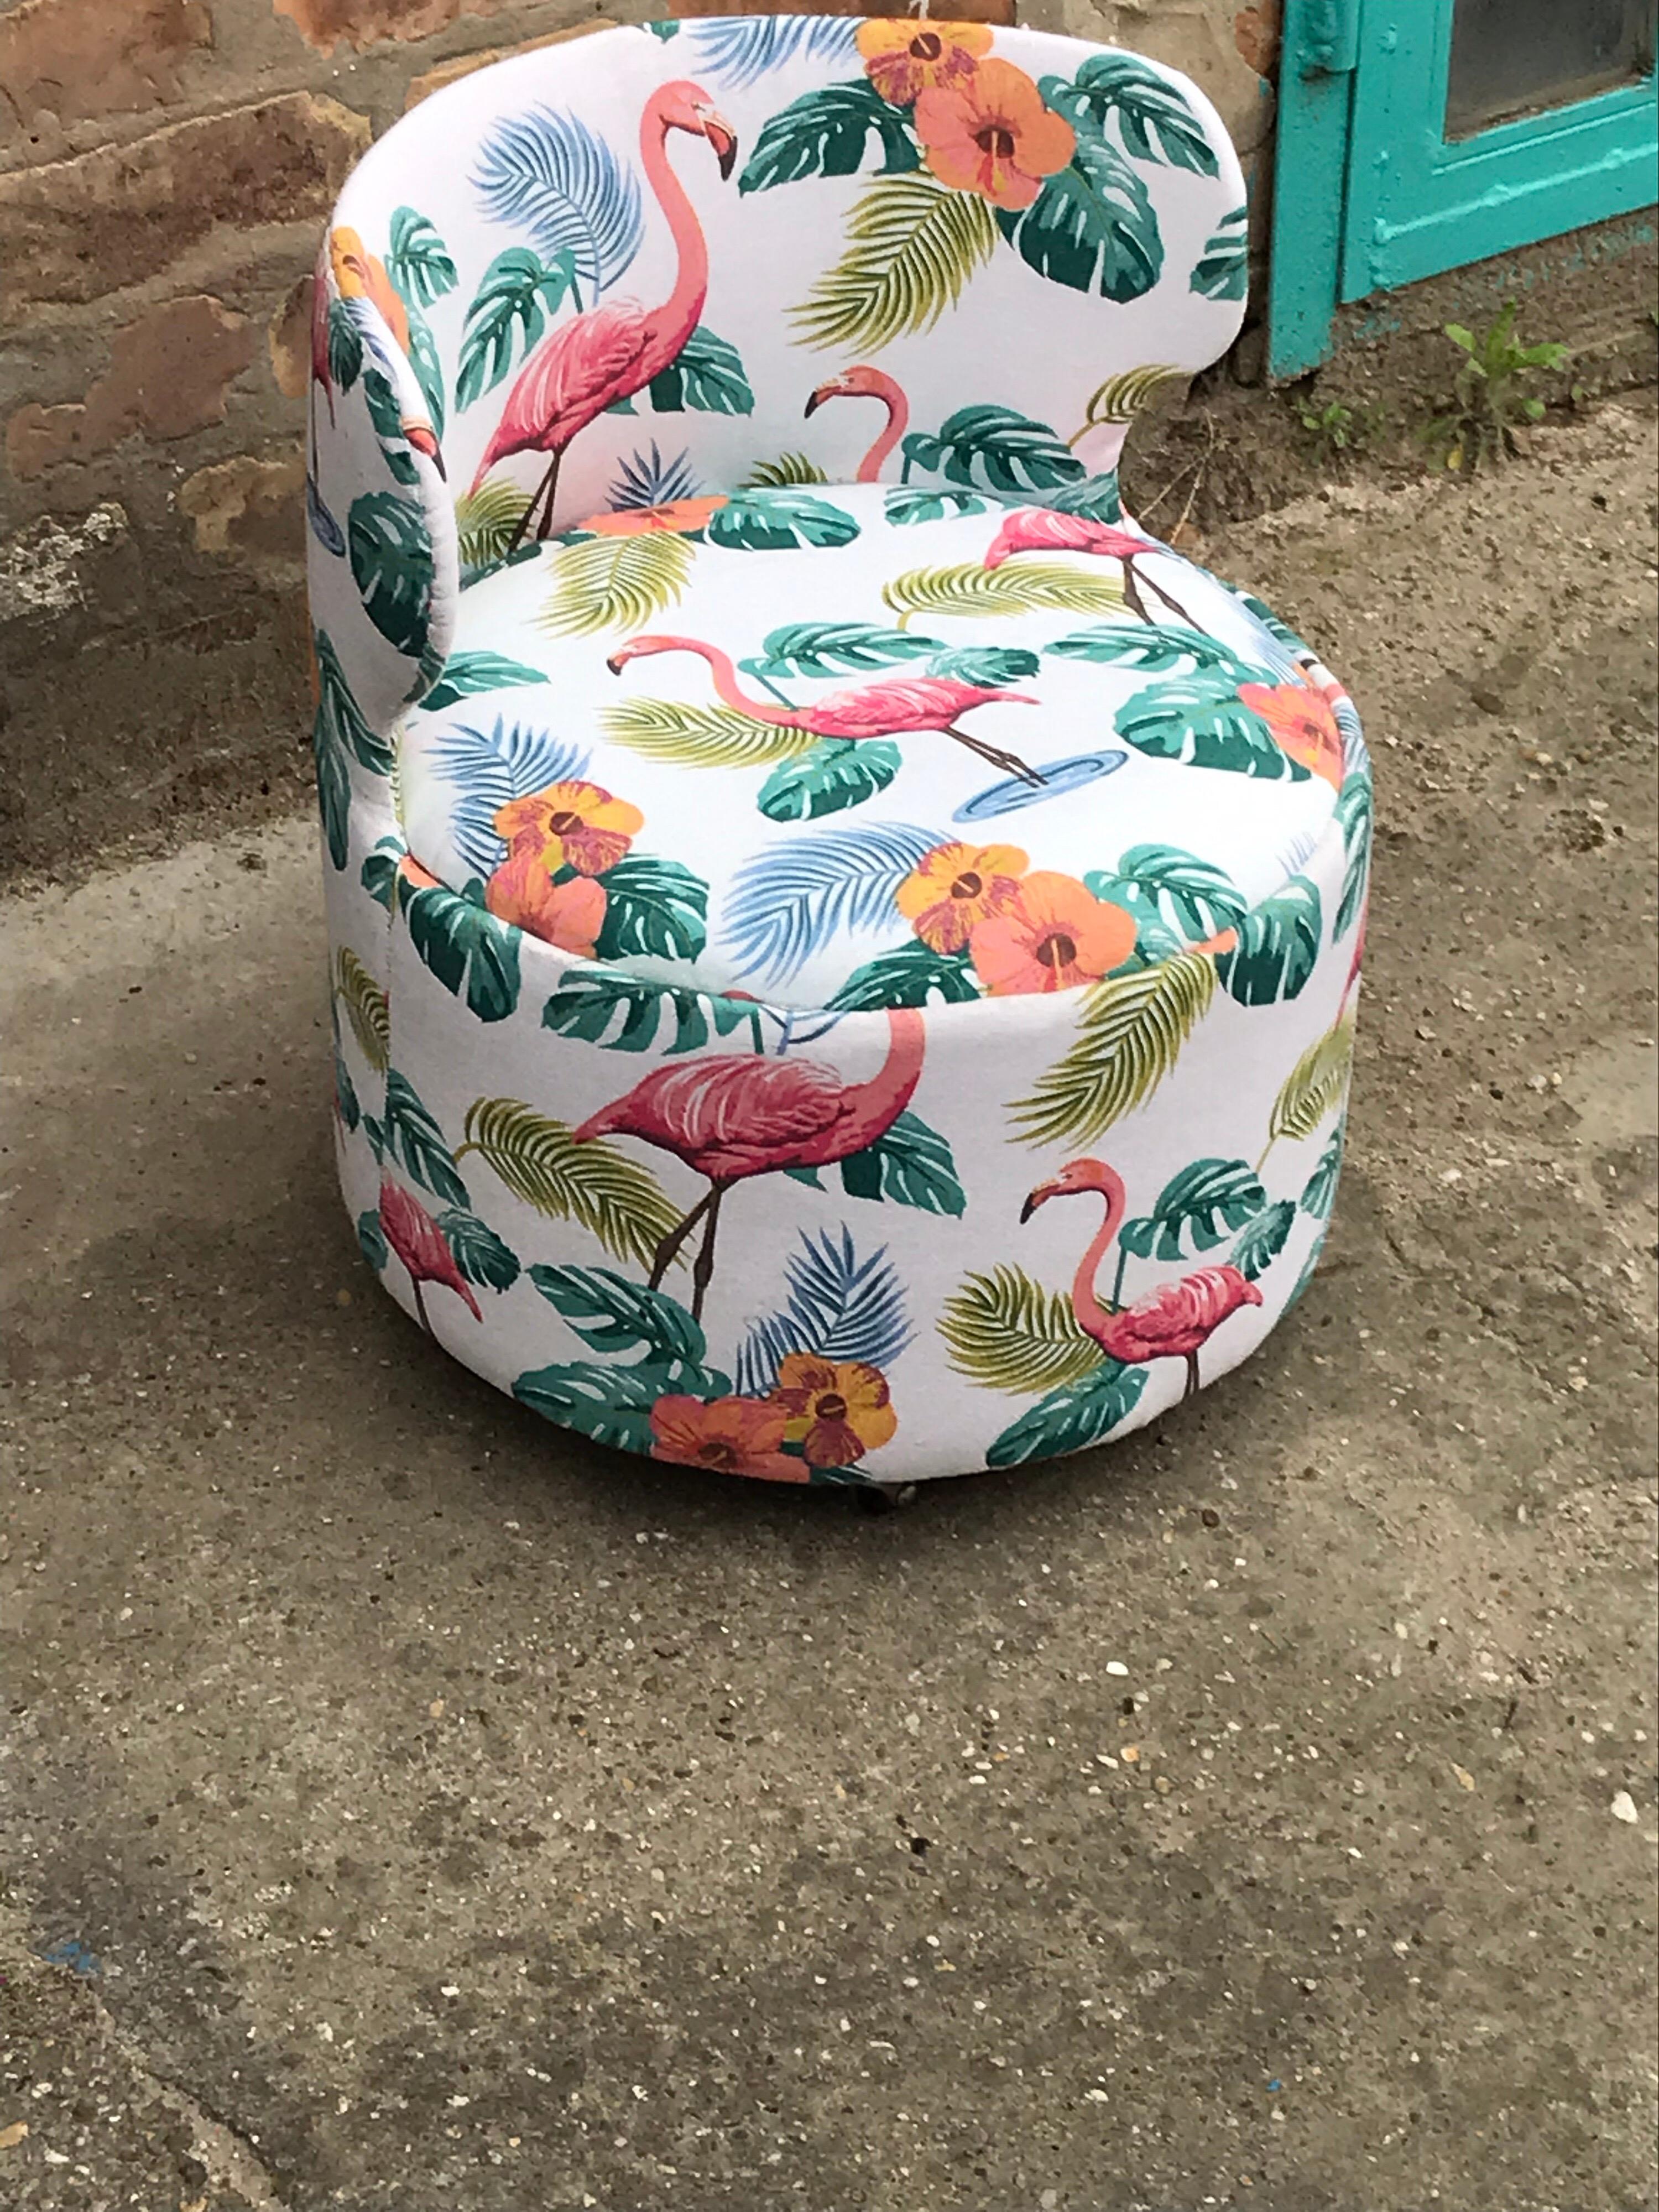 Retro armchair with flamingo pattern, 1970s
This chair was fully and professionally re-upholstered, the condition is excellent. With roller legs
Size: 38 x 35 x 44 H
Seat size: 27.